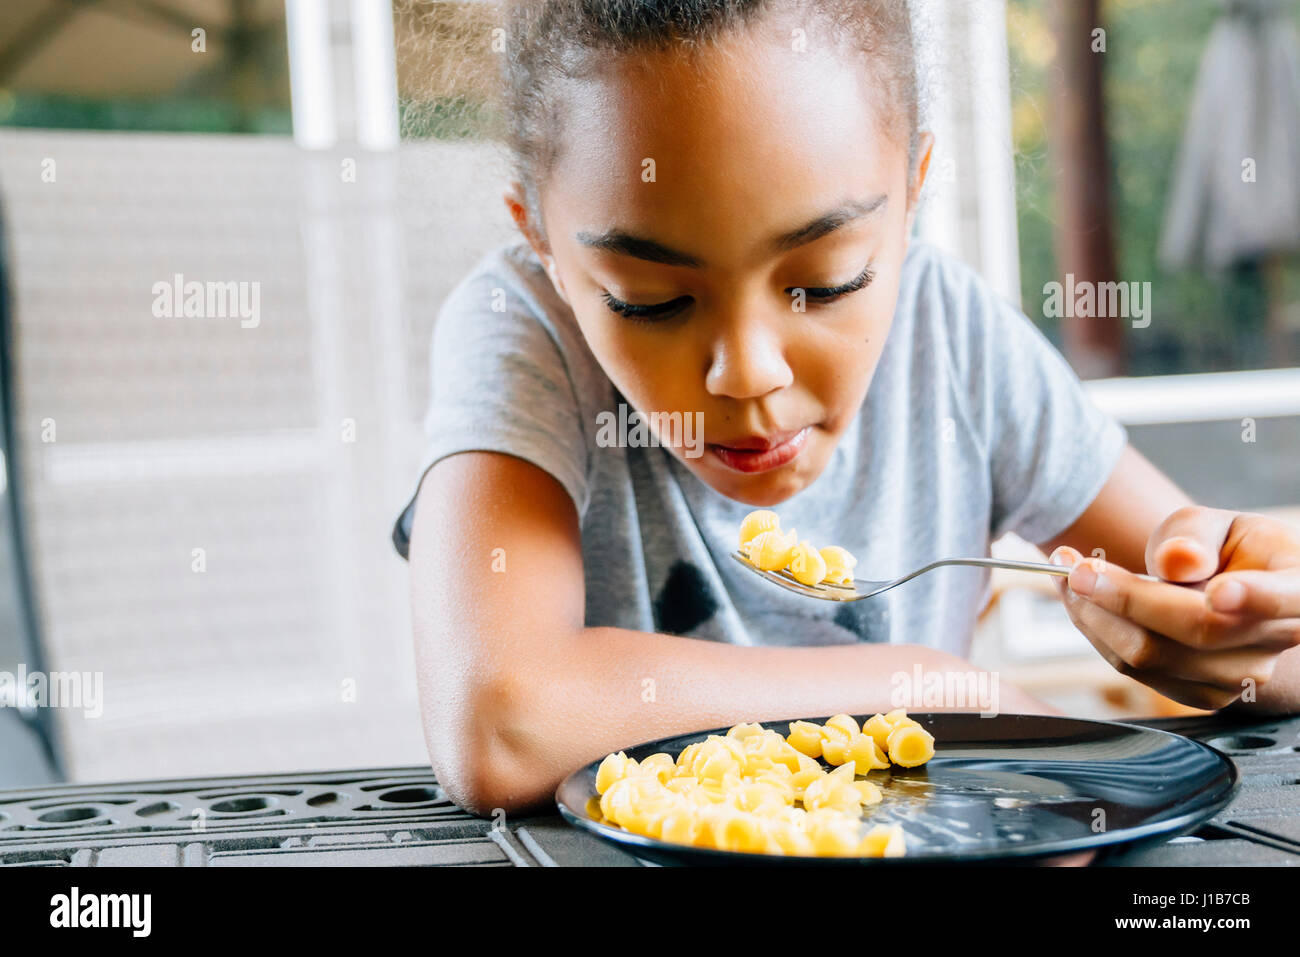 Mixed Race girl eating food with fork Stock Photo